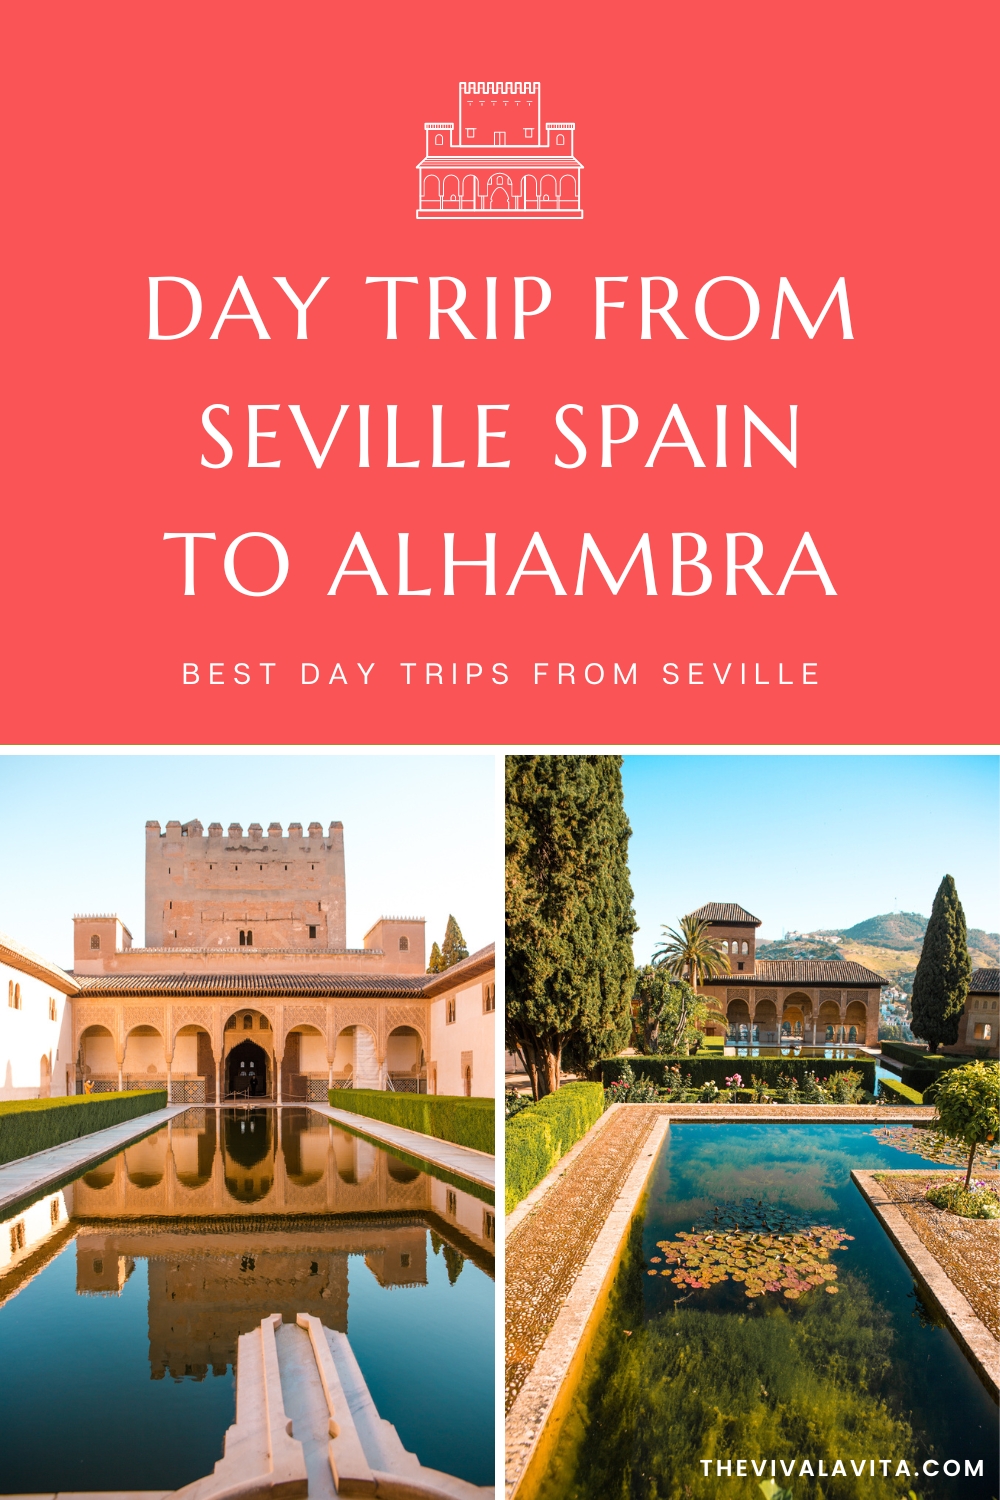 pinterest image showing the courtyard of Alhambra and Generalife gardens, with a headline: day trip from seville spain to Alhambra, best day trips from Seville